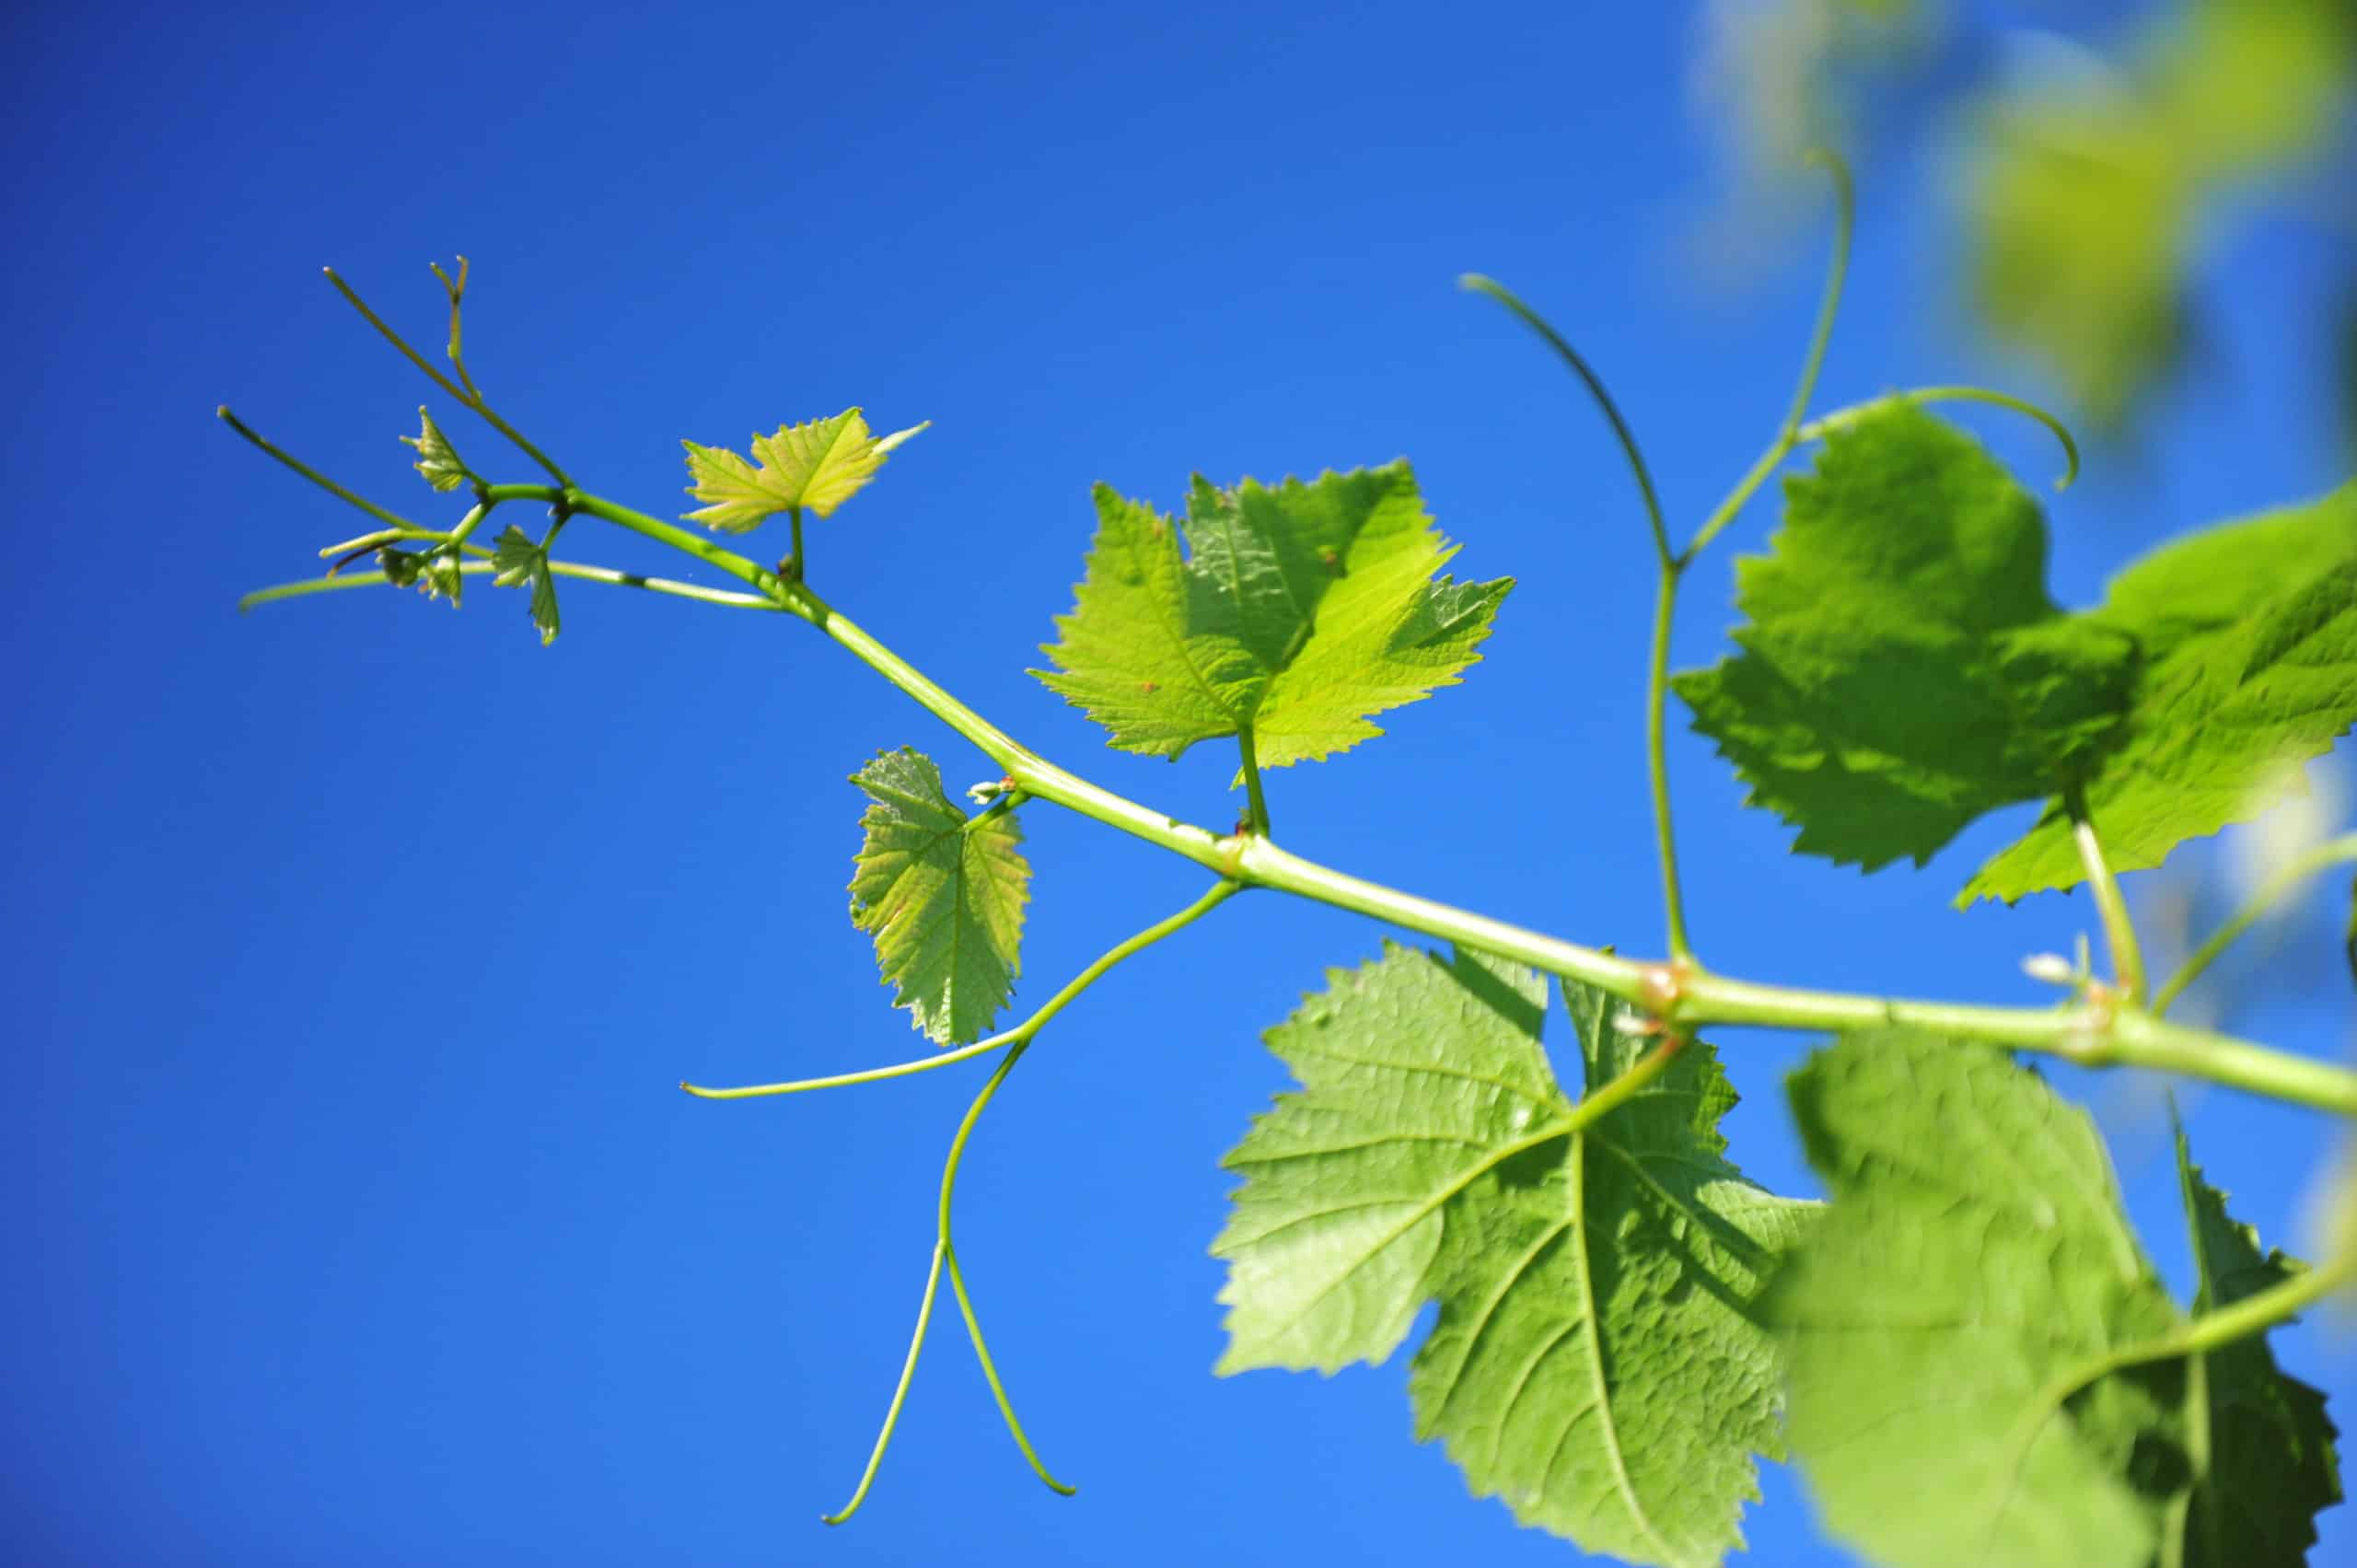 The Vegetative Cycle of the Vine